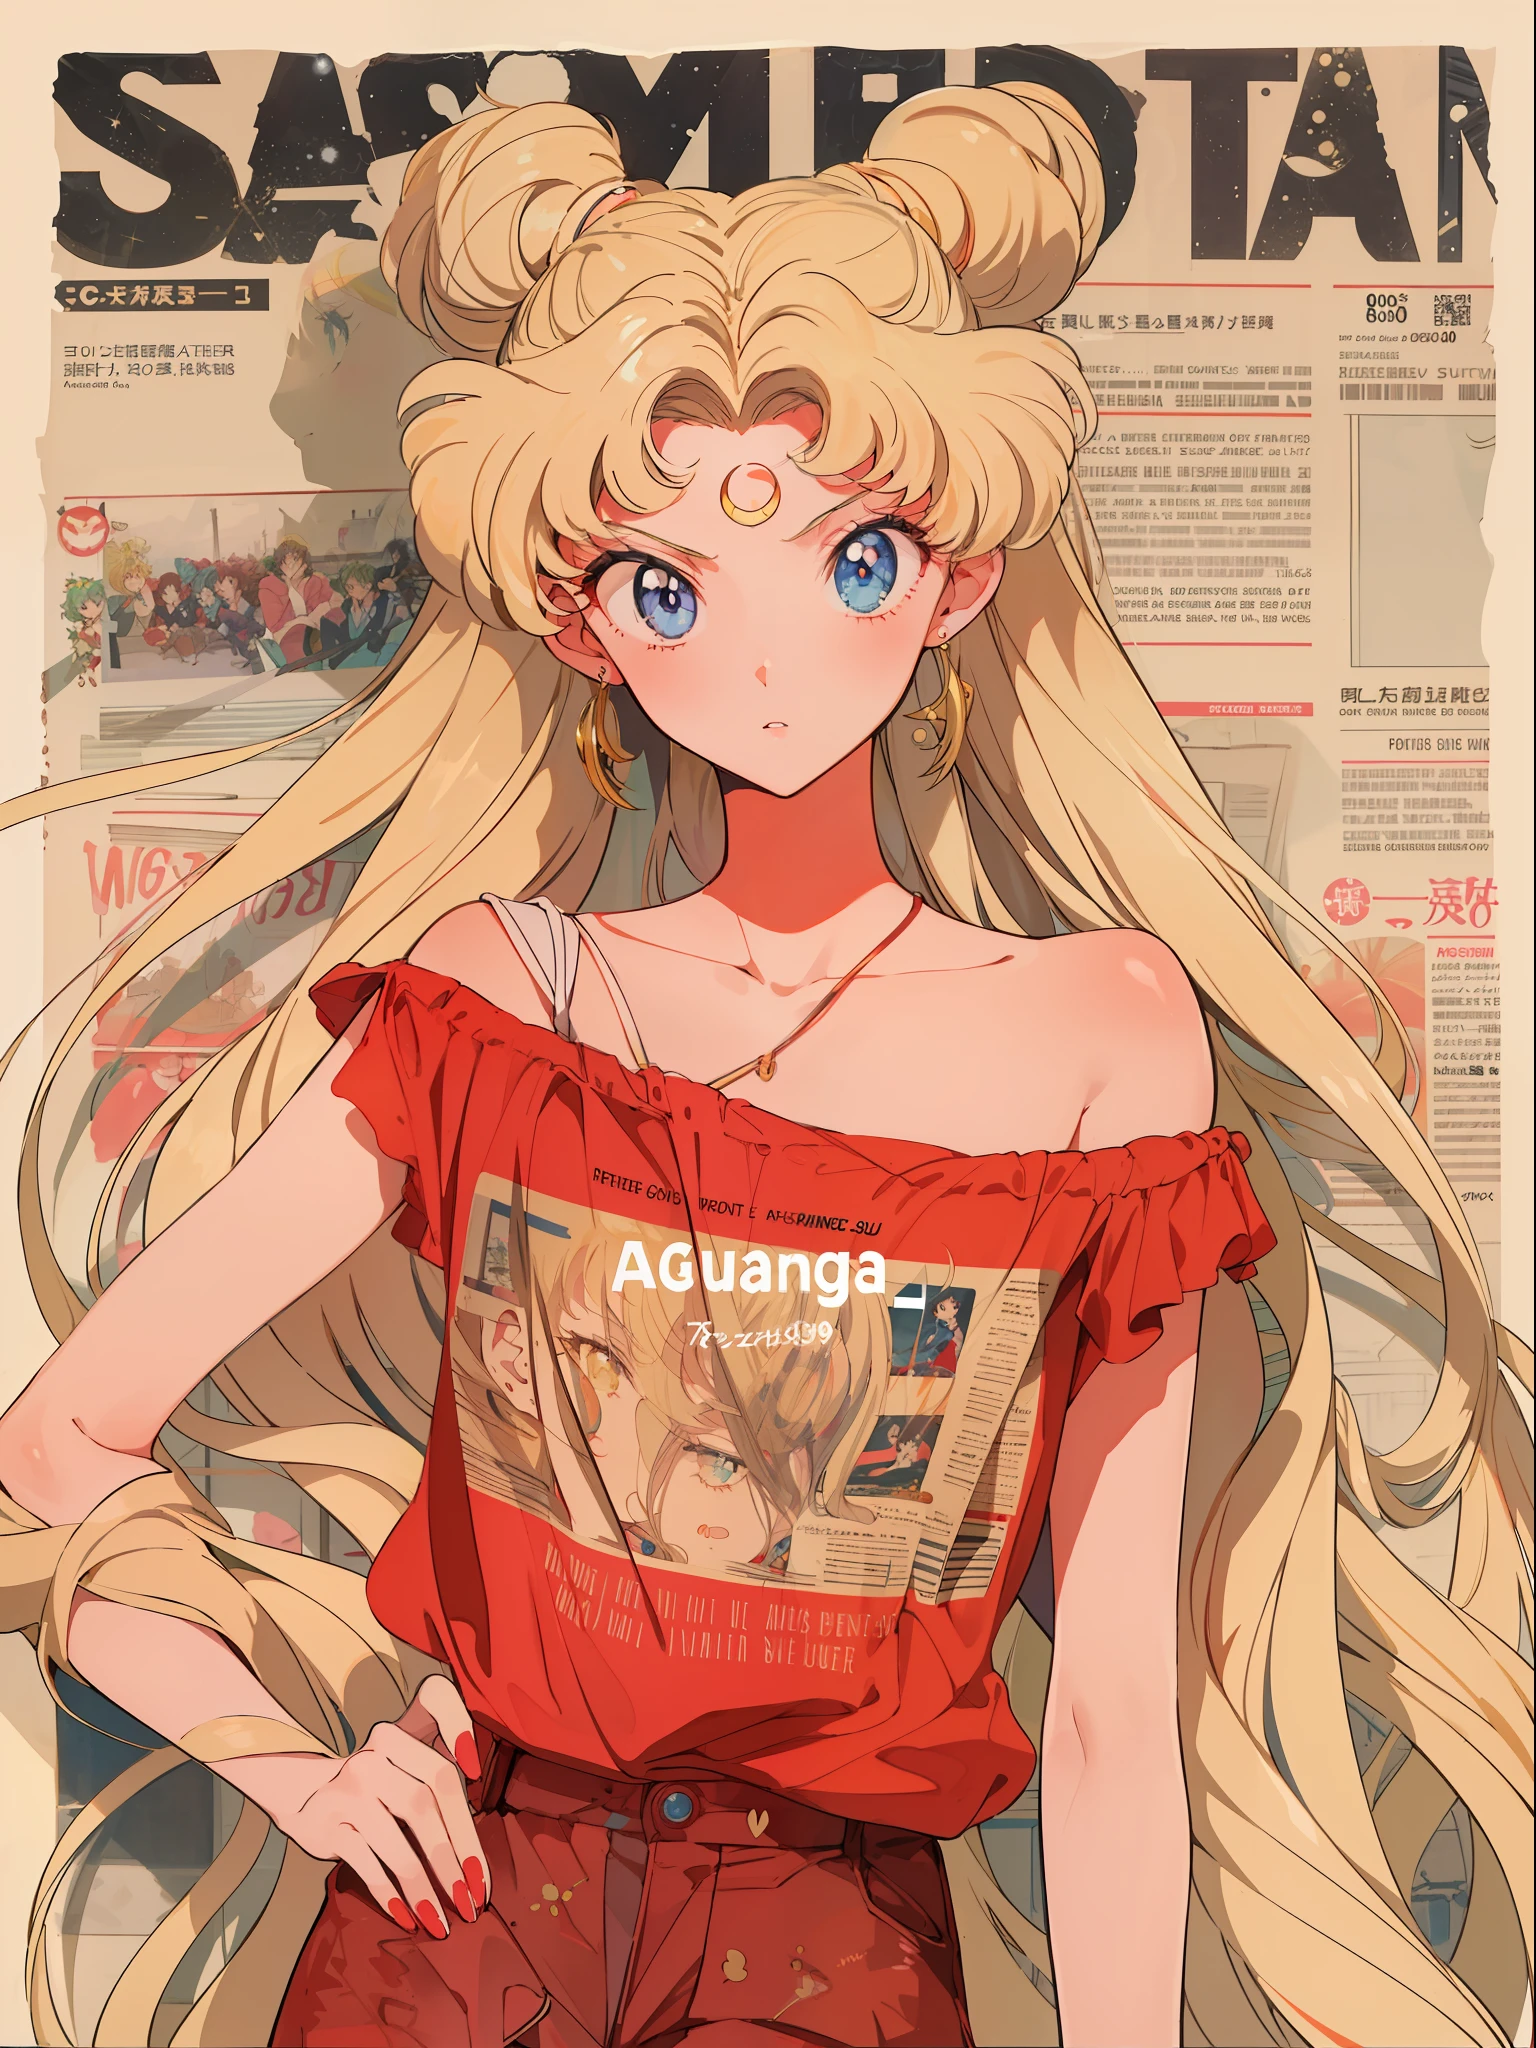 Close-up of a woman with long blonde hair in a red blouse, Retro anime girl, Sailor Moon!!!!!!!!, Sailor Moon style, 8 0 s anime art style, sailor moon aesthetic, anime vintage colors, 9 0 s anime art style, the sailor moon. Beautiful, 8 0 s anime style, 8 0 s anime vibe, author：the sailor moon